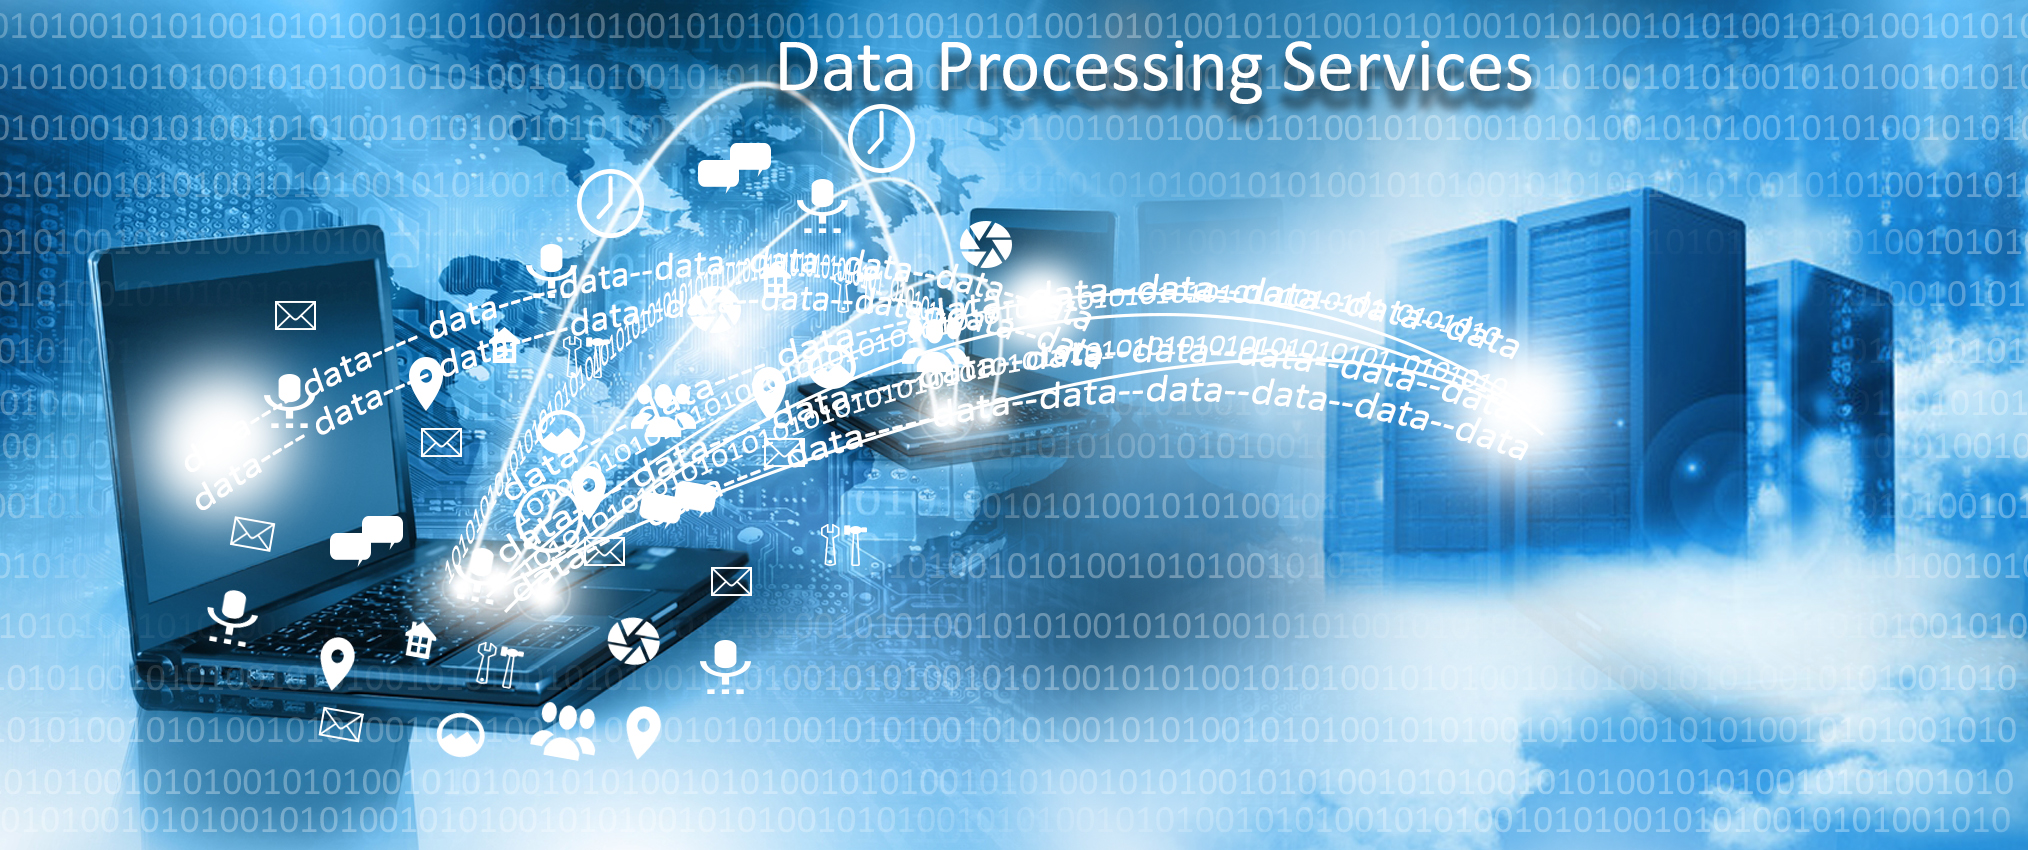 Outsource Data processing services